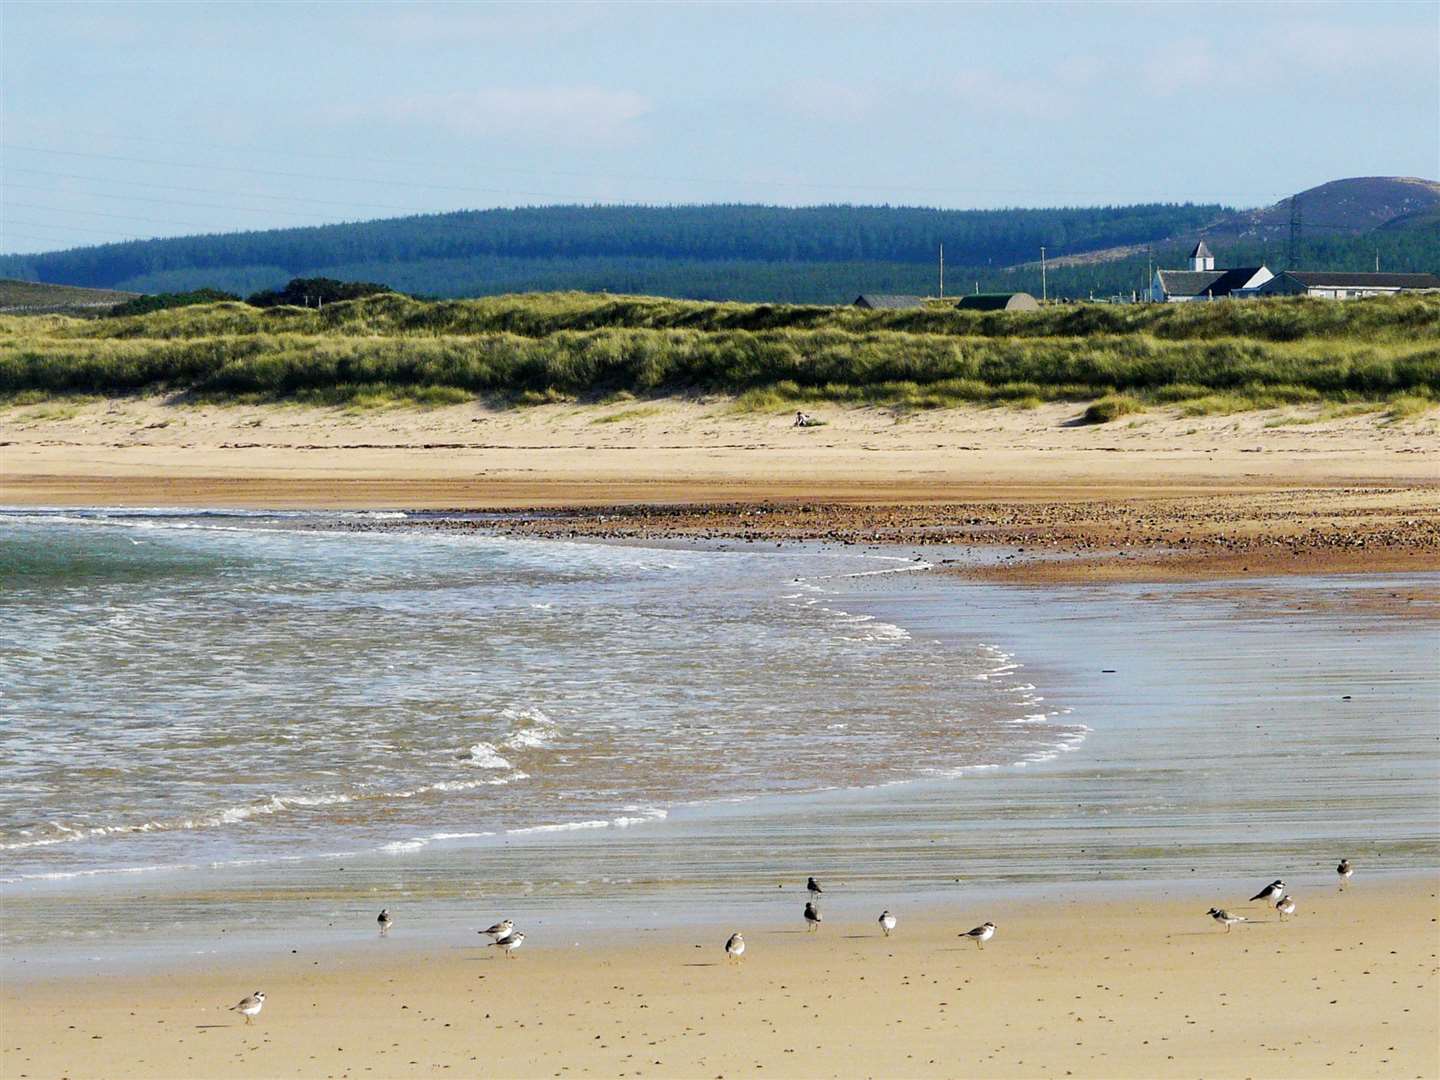 Sandside beach, with Reay's historic parish church in the distance.